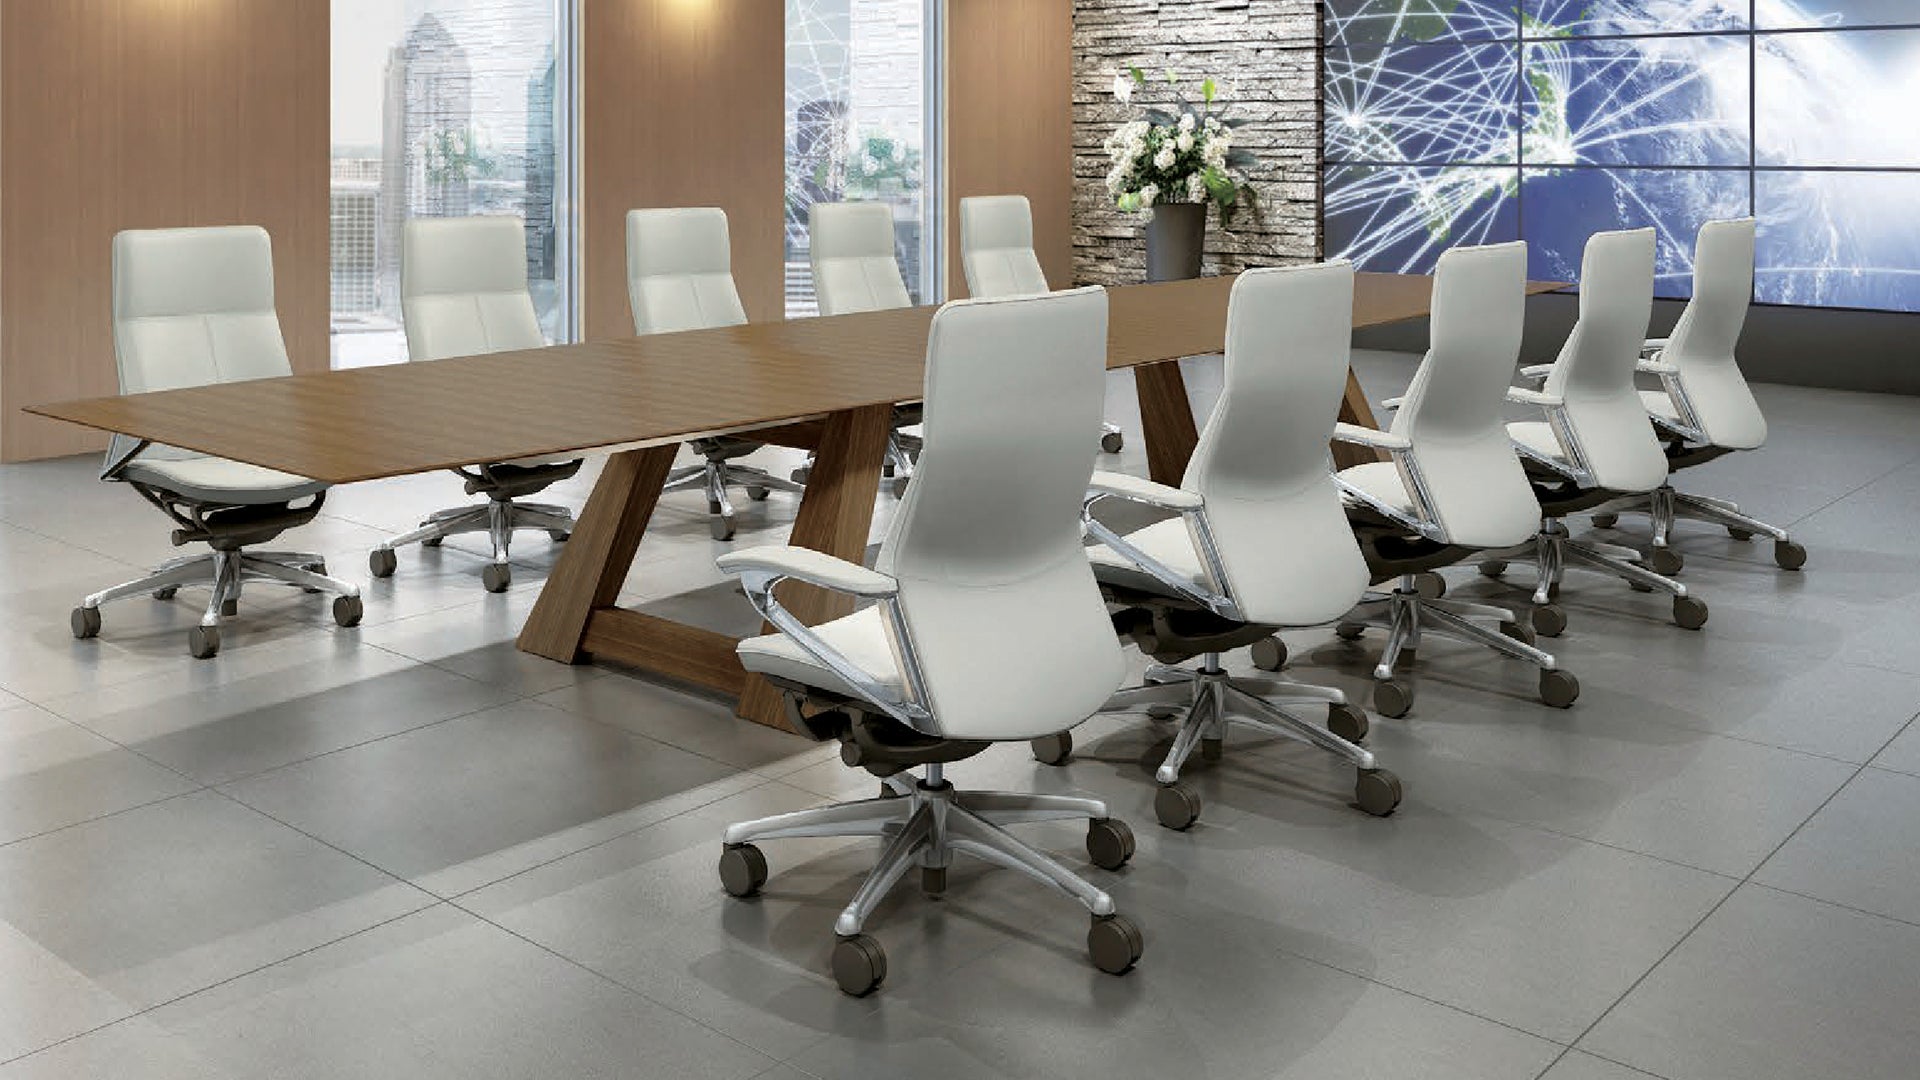 4 Work Chairs That Make Workplace Atmospheres Attractive